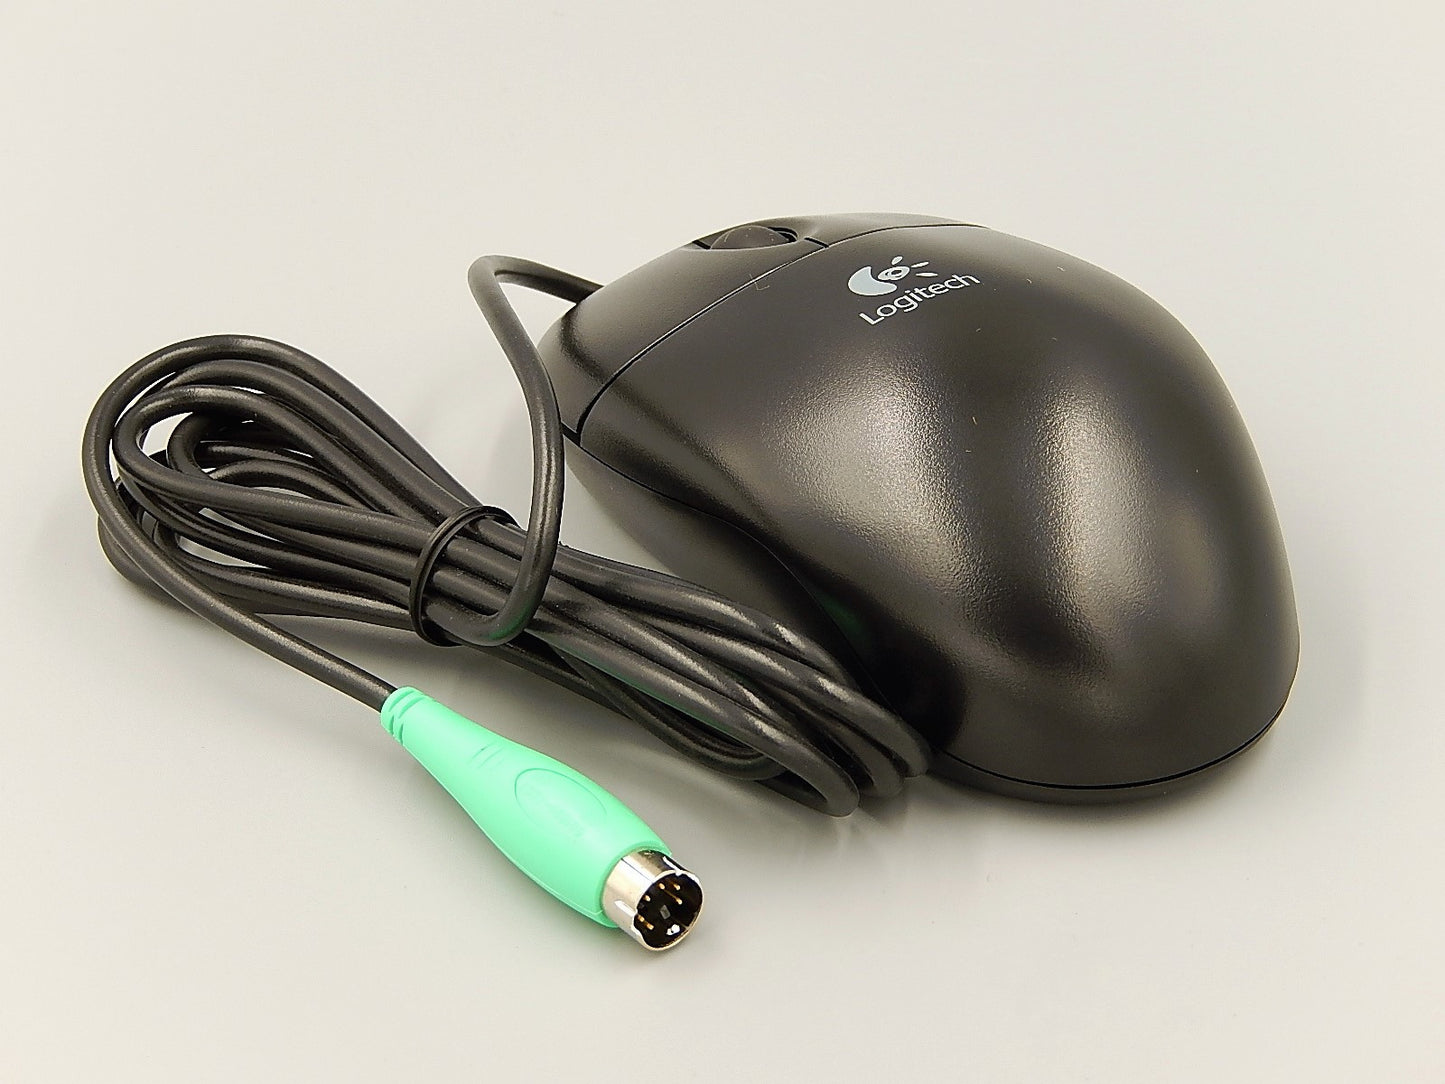 PS2 MOUSE